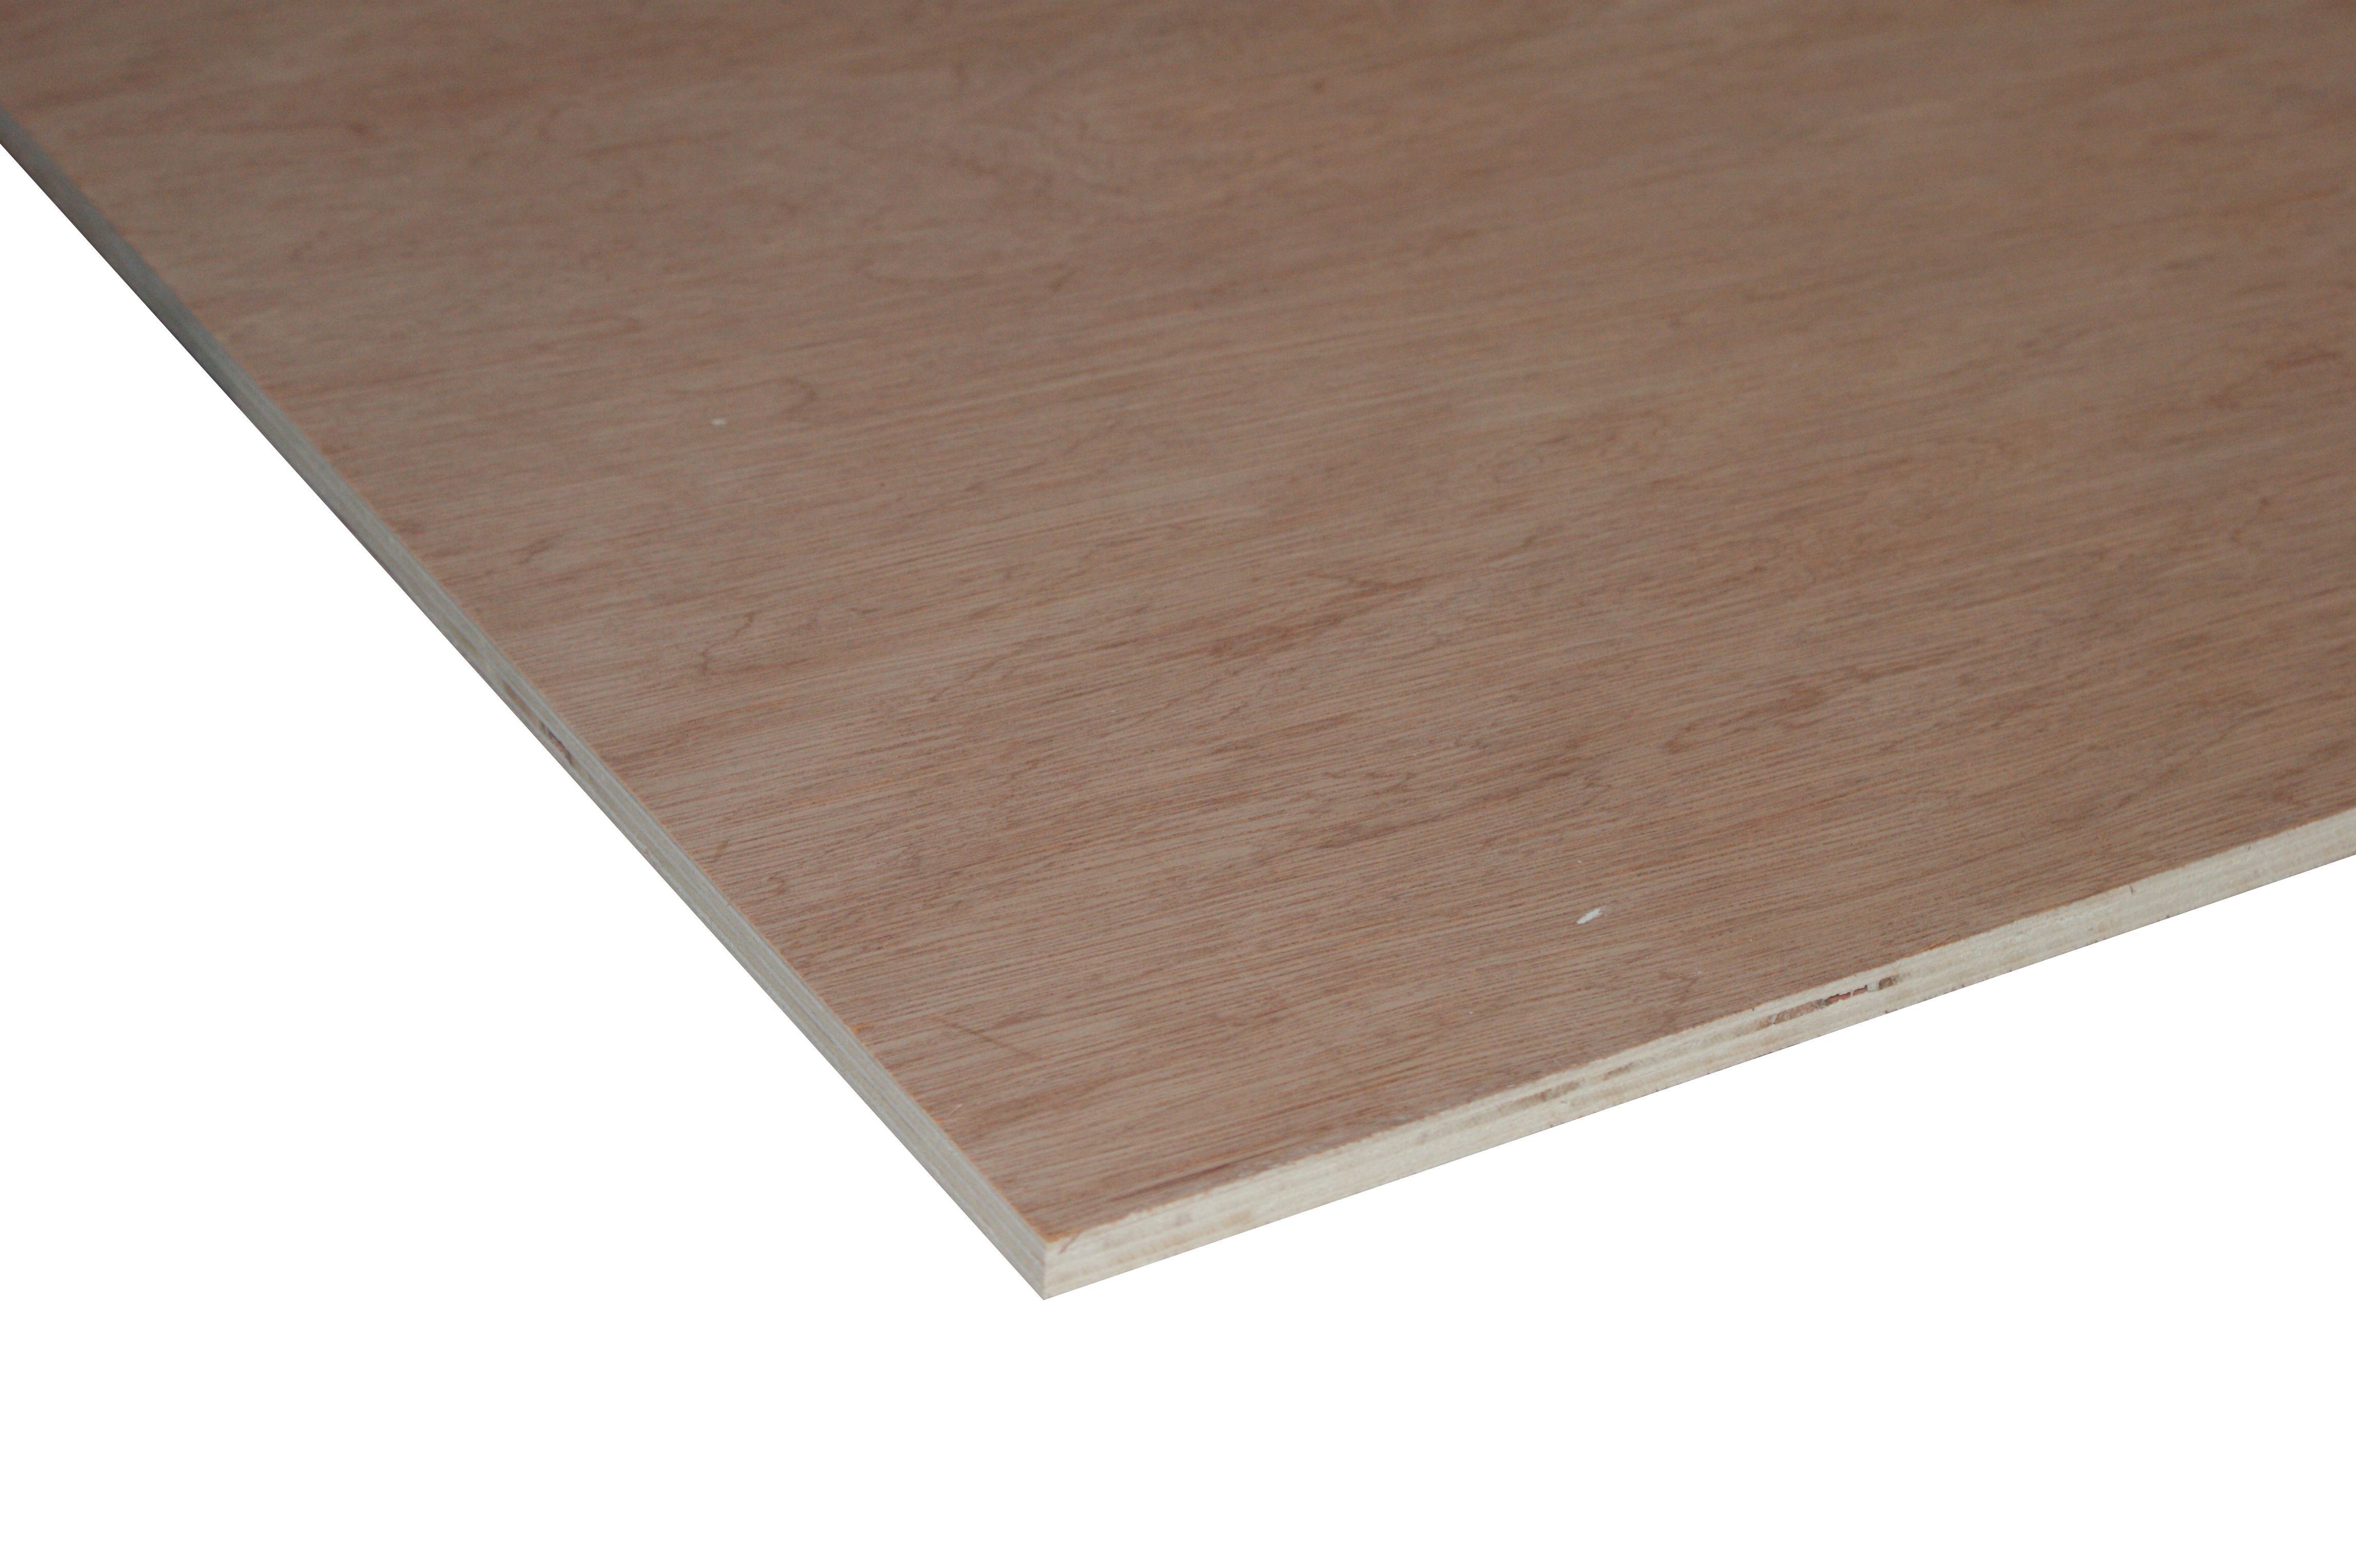 Image of Wickes Non-Structural Hardwood Plywood - 12 x 607 x 1829mm